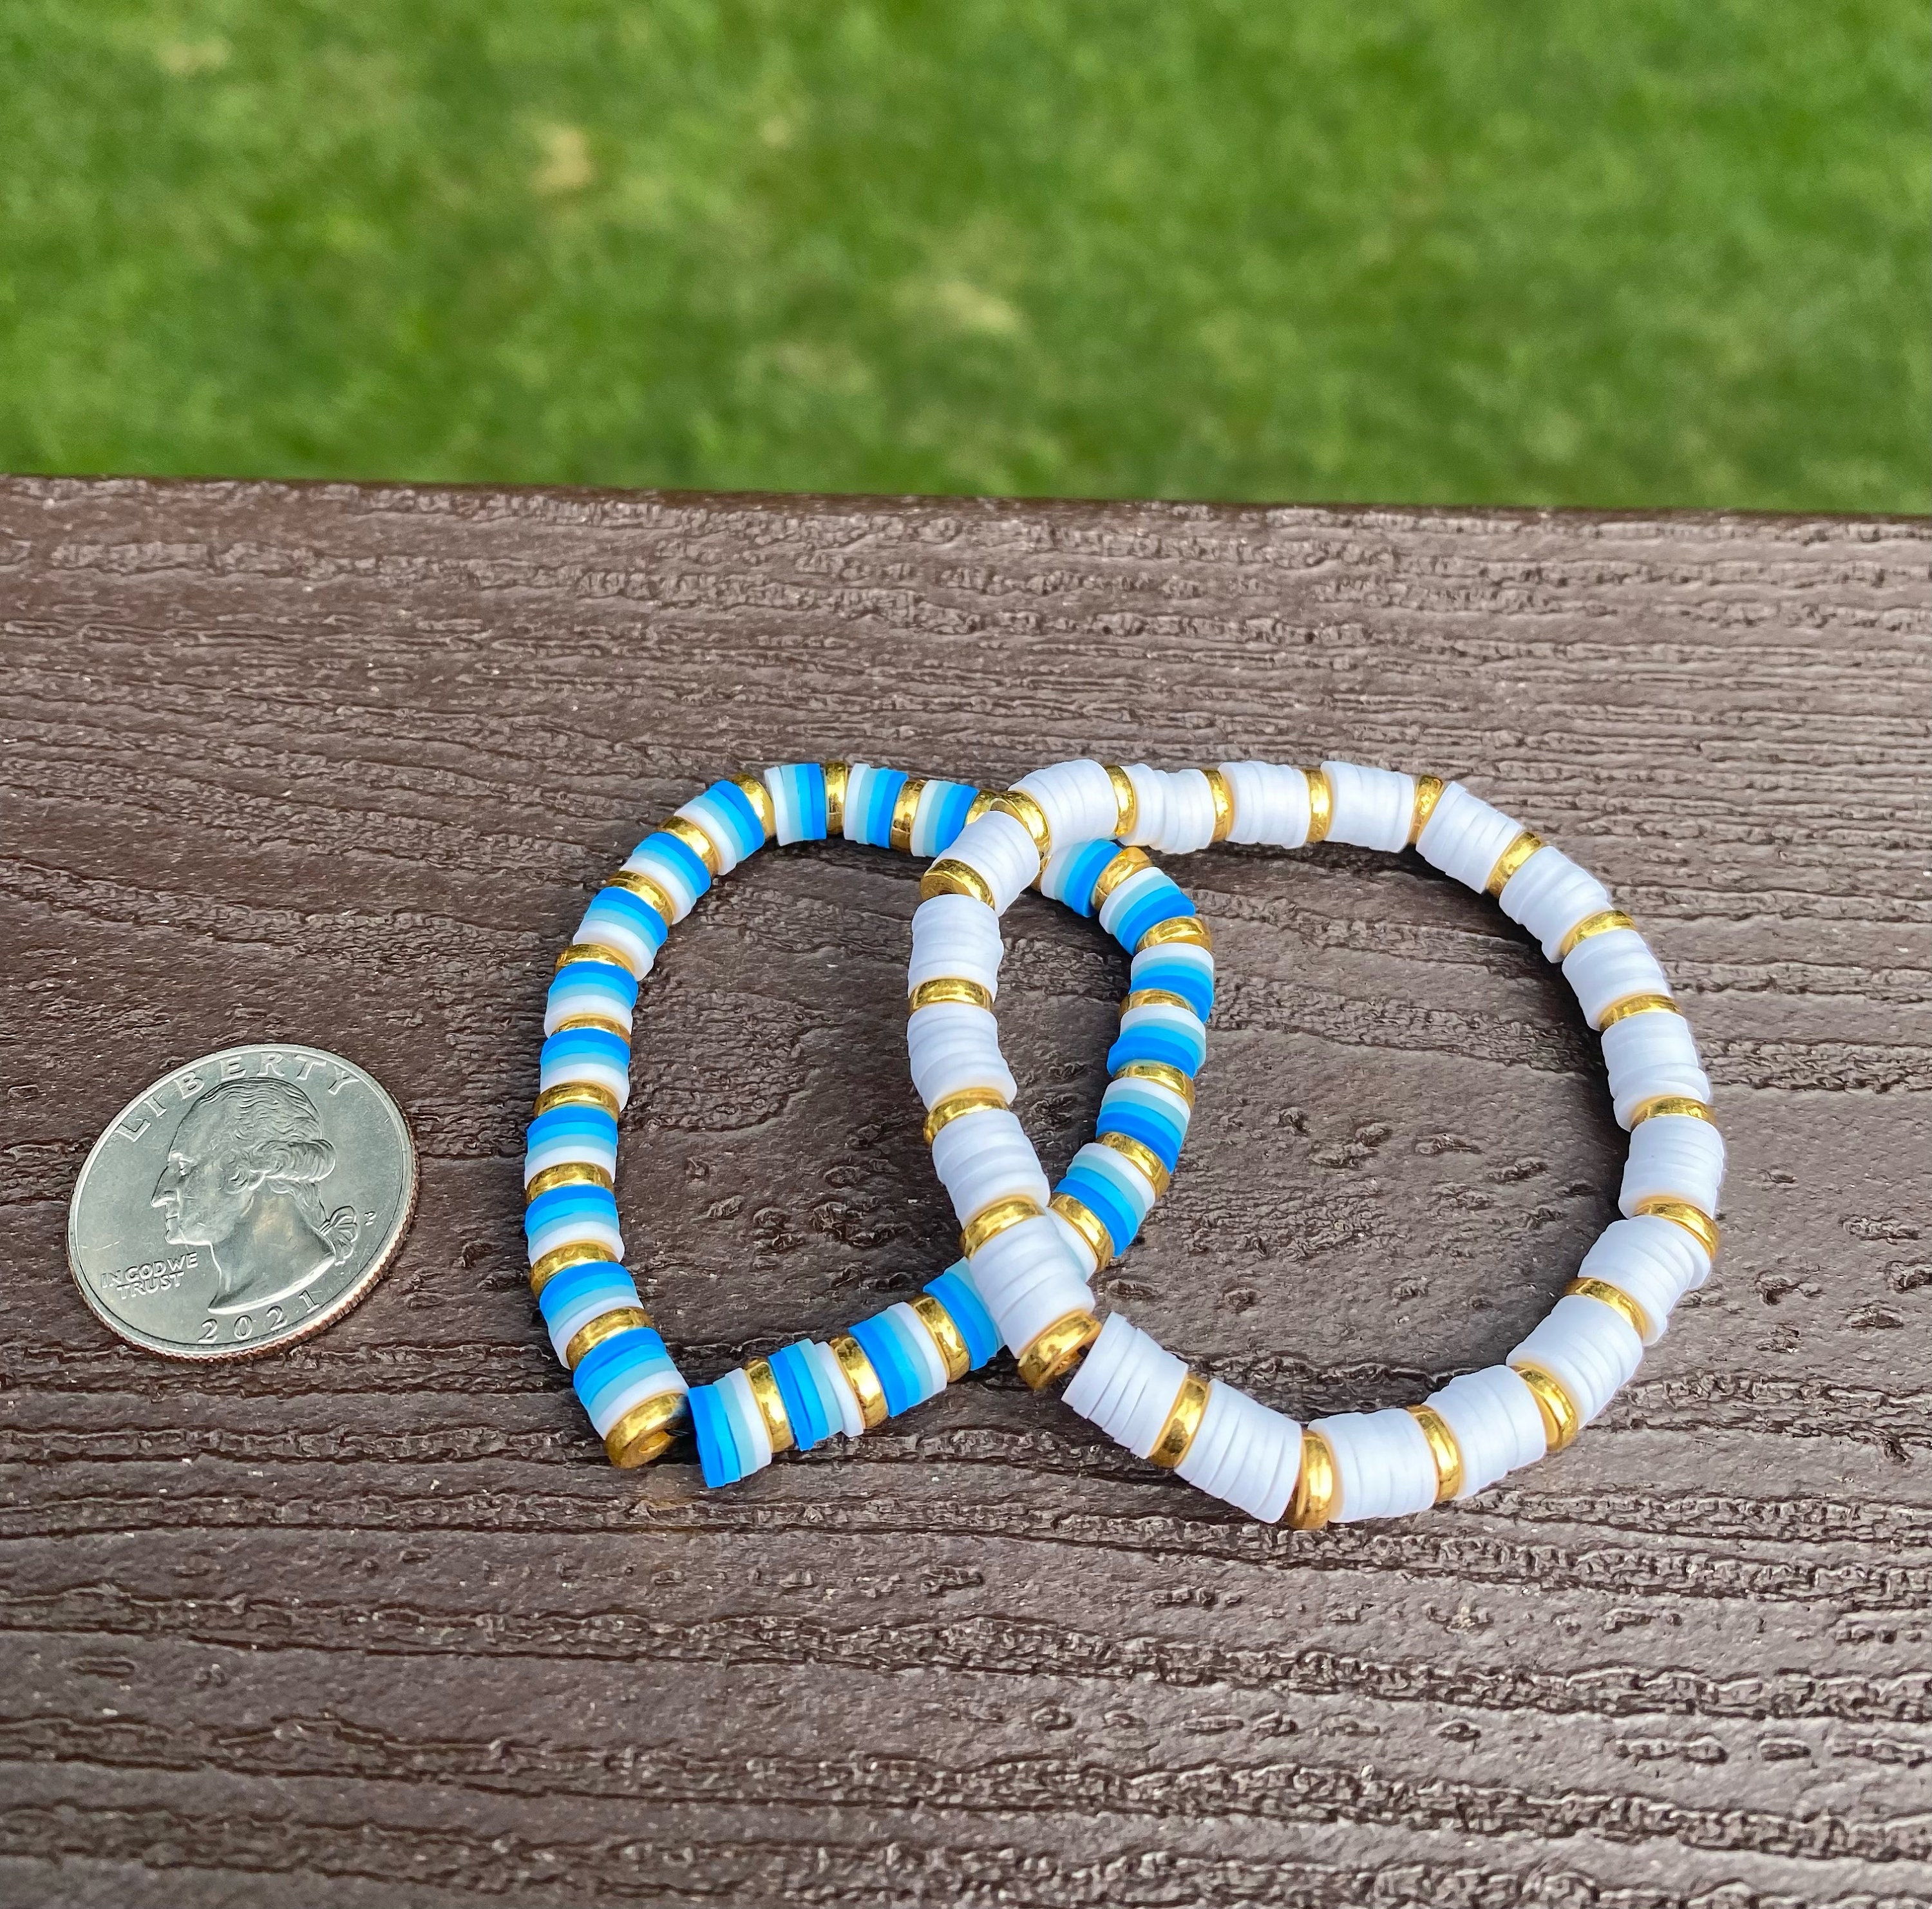 Heishi Beaded Bracelet, Baby Blue with Silver or Gold Drum Bead Stretchy Bracelet #698 Silver Drum Bead